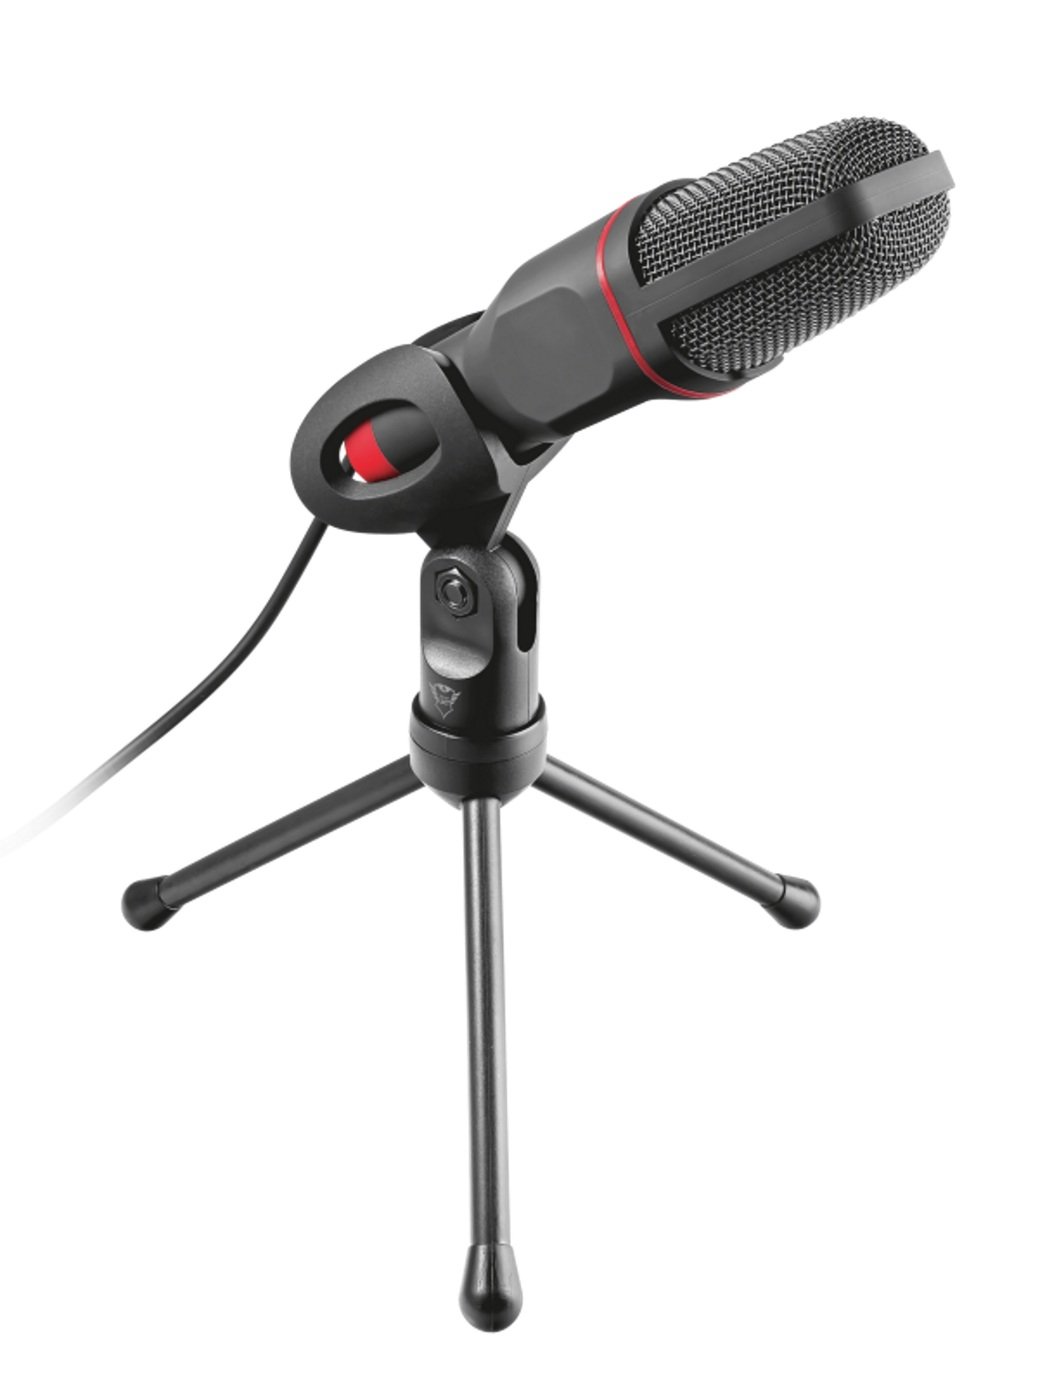 Trust GXT212 Micro USB Microphone Review